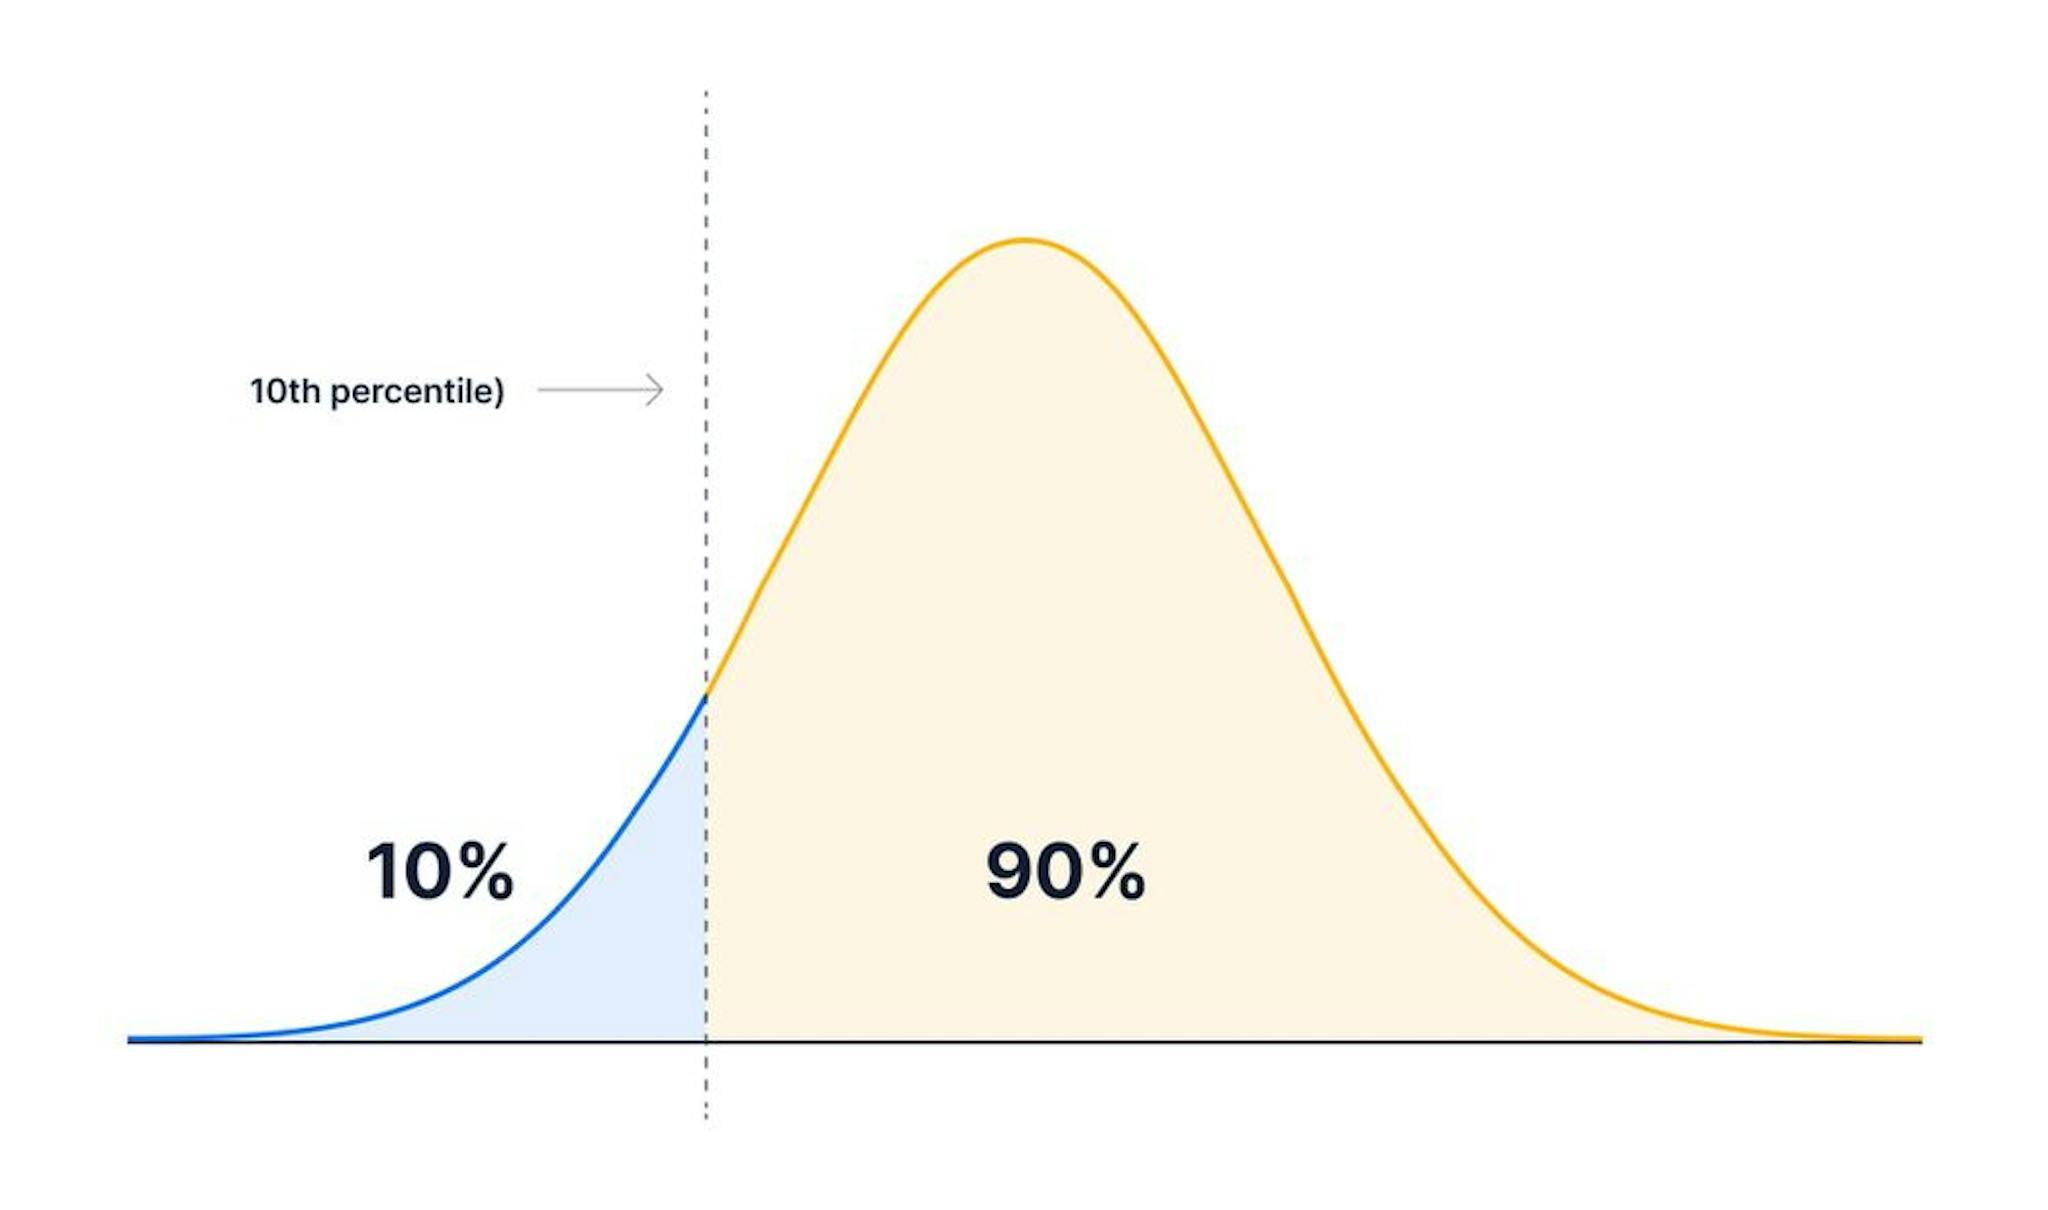 A normal distribution with the 10th percentile depicted. 